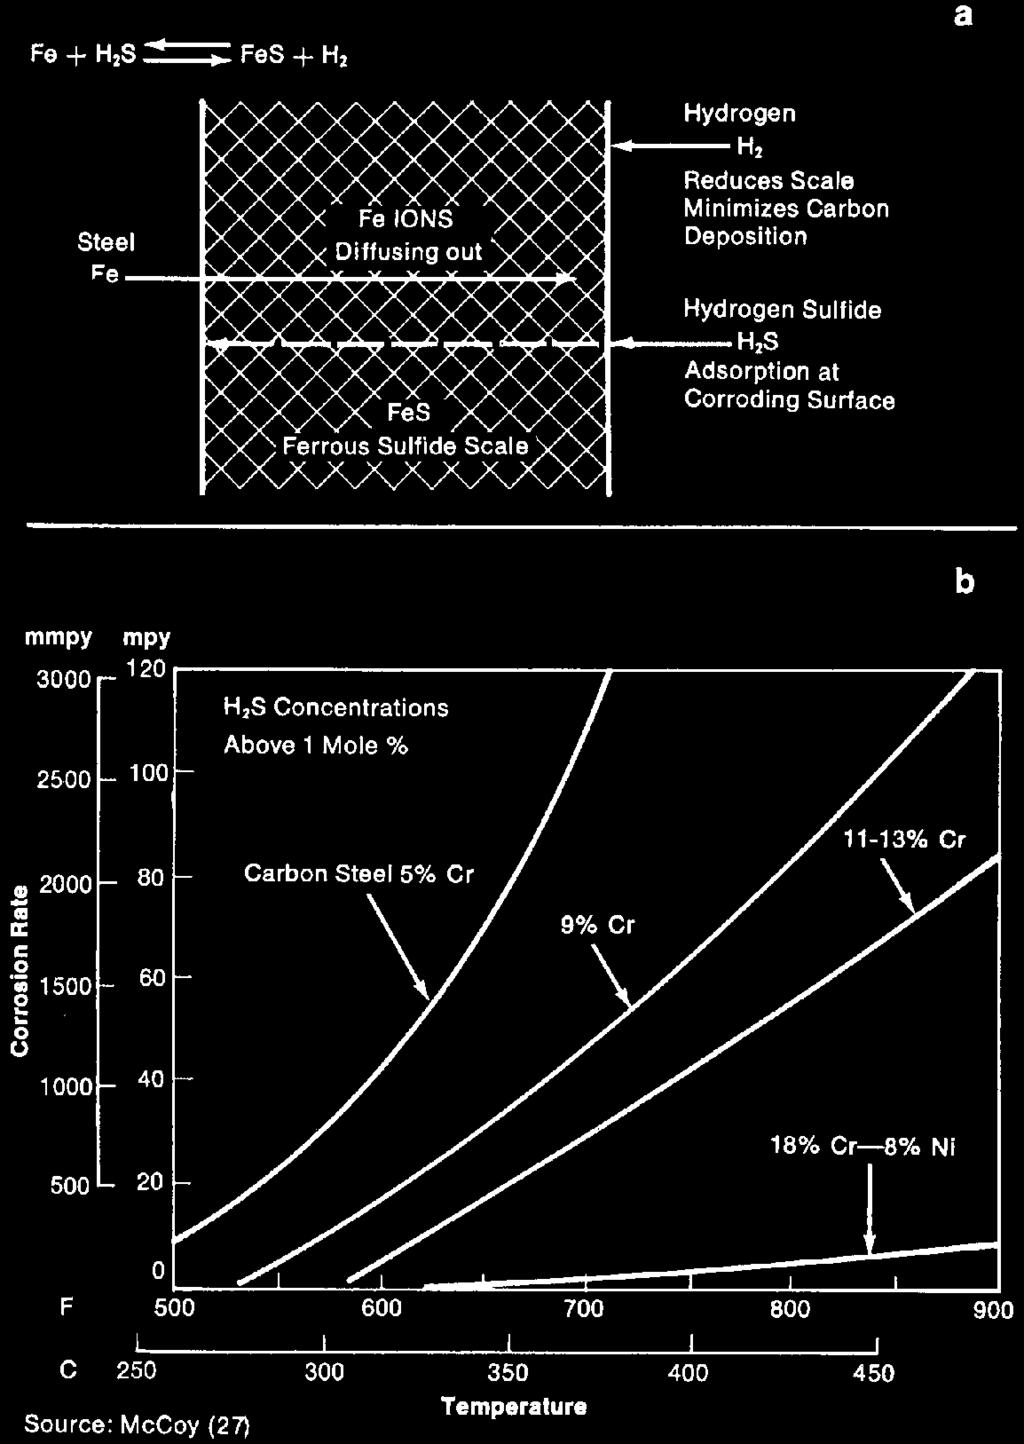 Figure 48 Sulfide Corrosion Reaction Corrosion Rate Curves for H 2 /H 2 S Environments Type 430 stainless steel tubing in this feedeffluent heat exchanger operates at temperatures ranging from